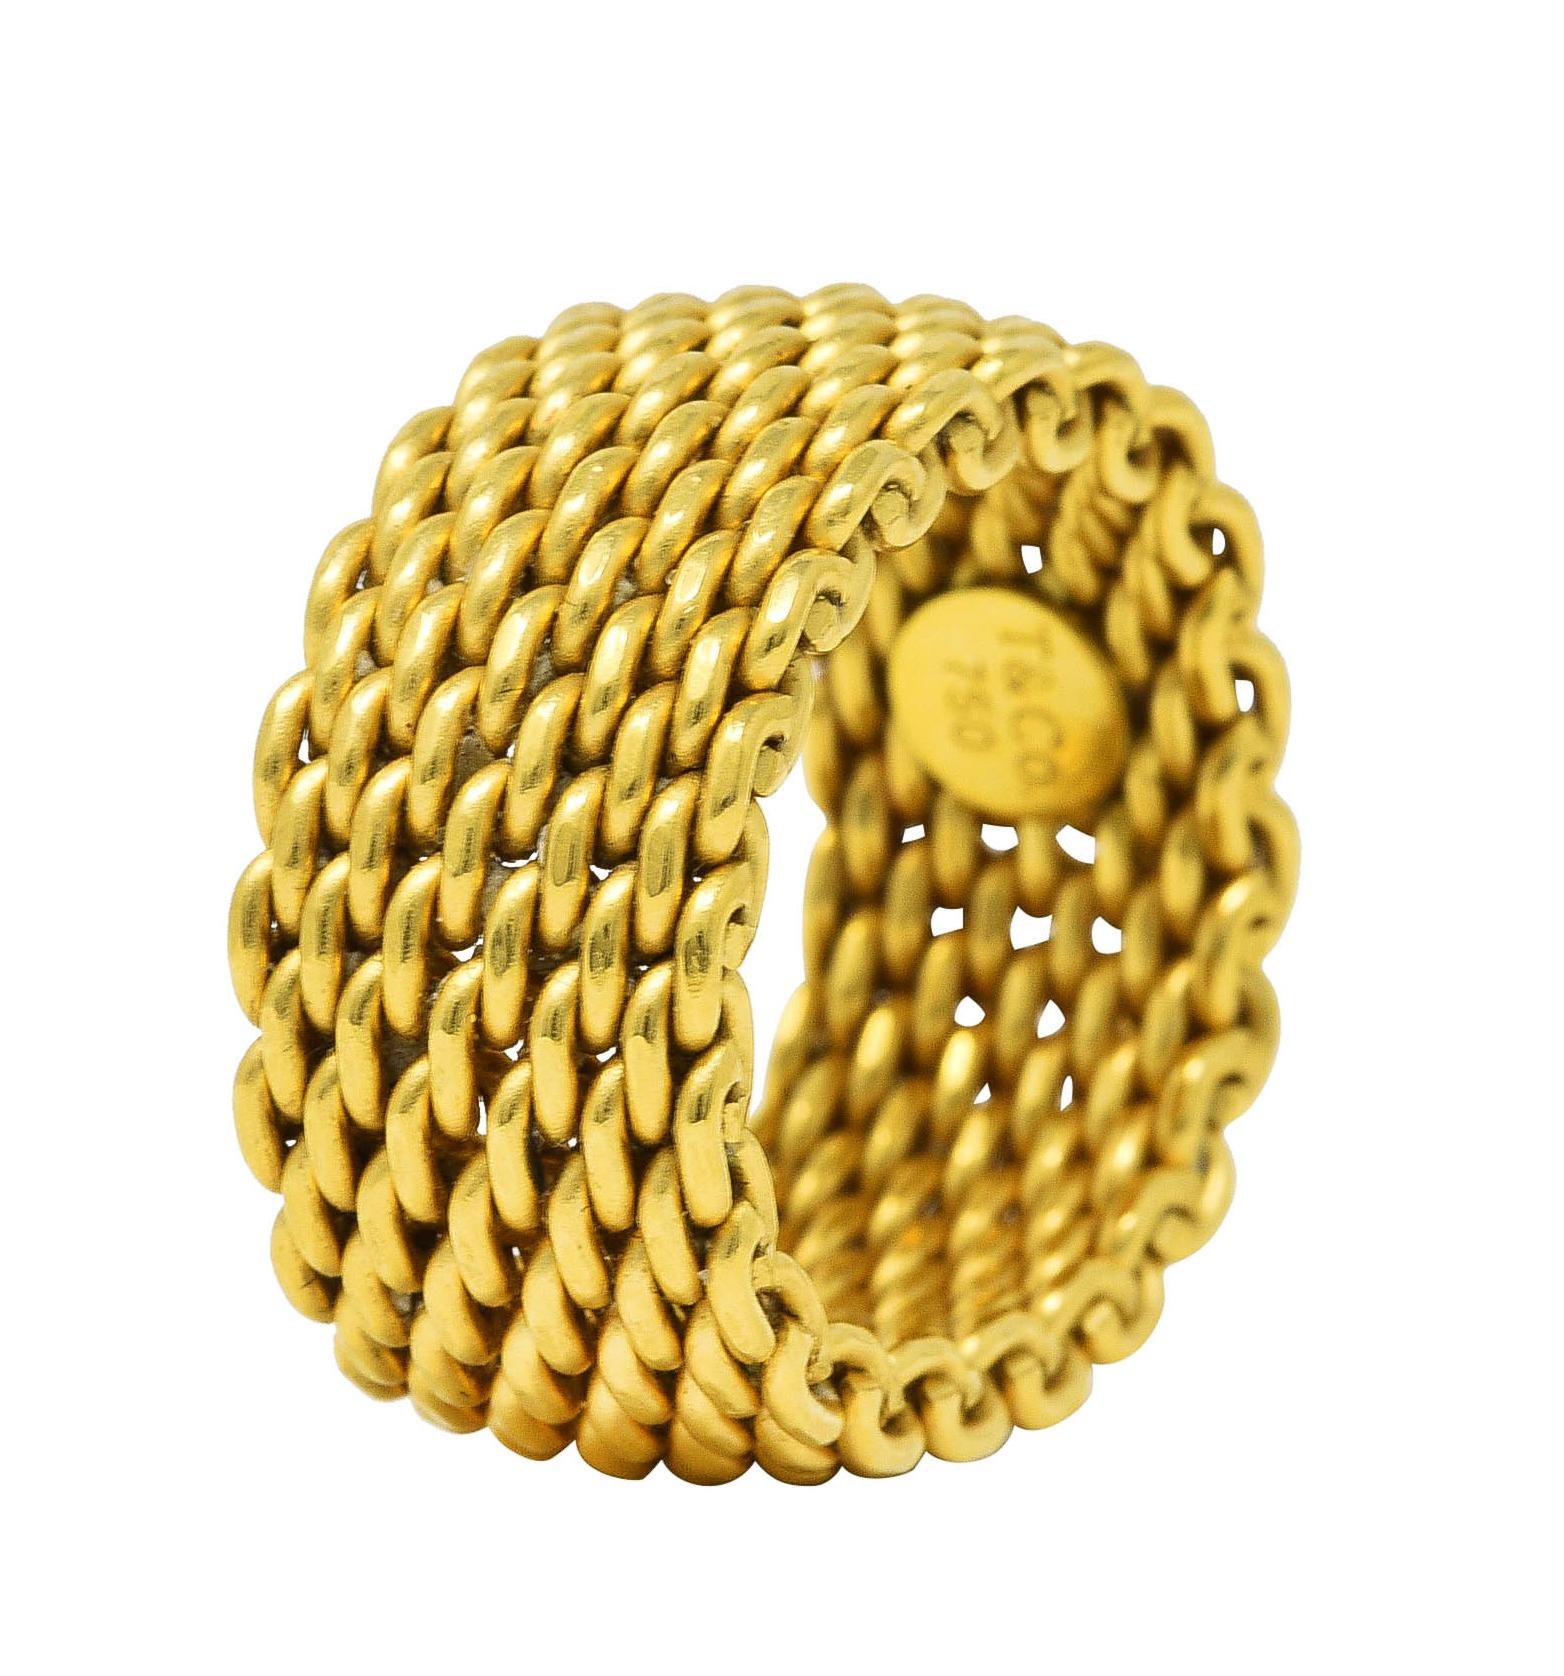 Ring is designed as flexible woven mesh fully around. With high polished gold finish. Stamped 750 for 18 karat gold. With maker's mark for Tiffany & Co. Circa: 21st century from the Somerset collection. Ring size: 7 and not sizable. Measures: North